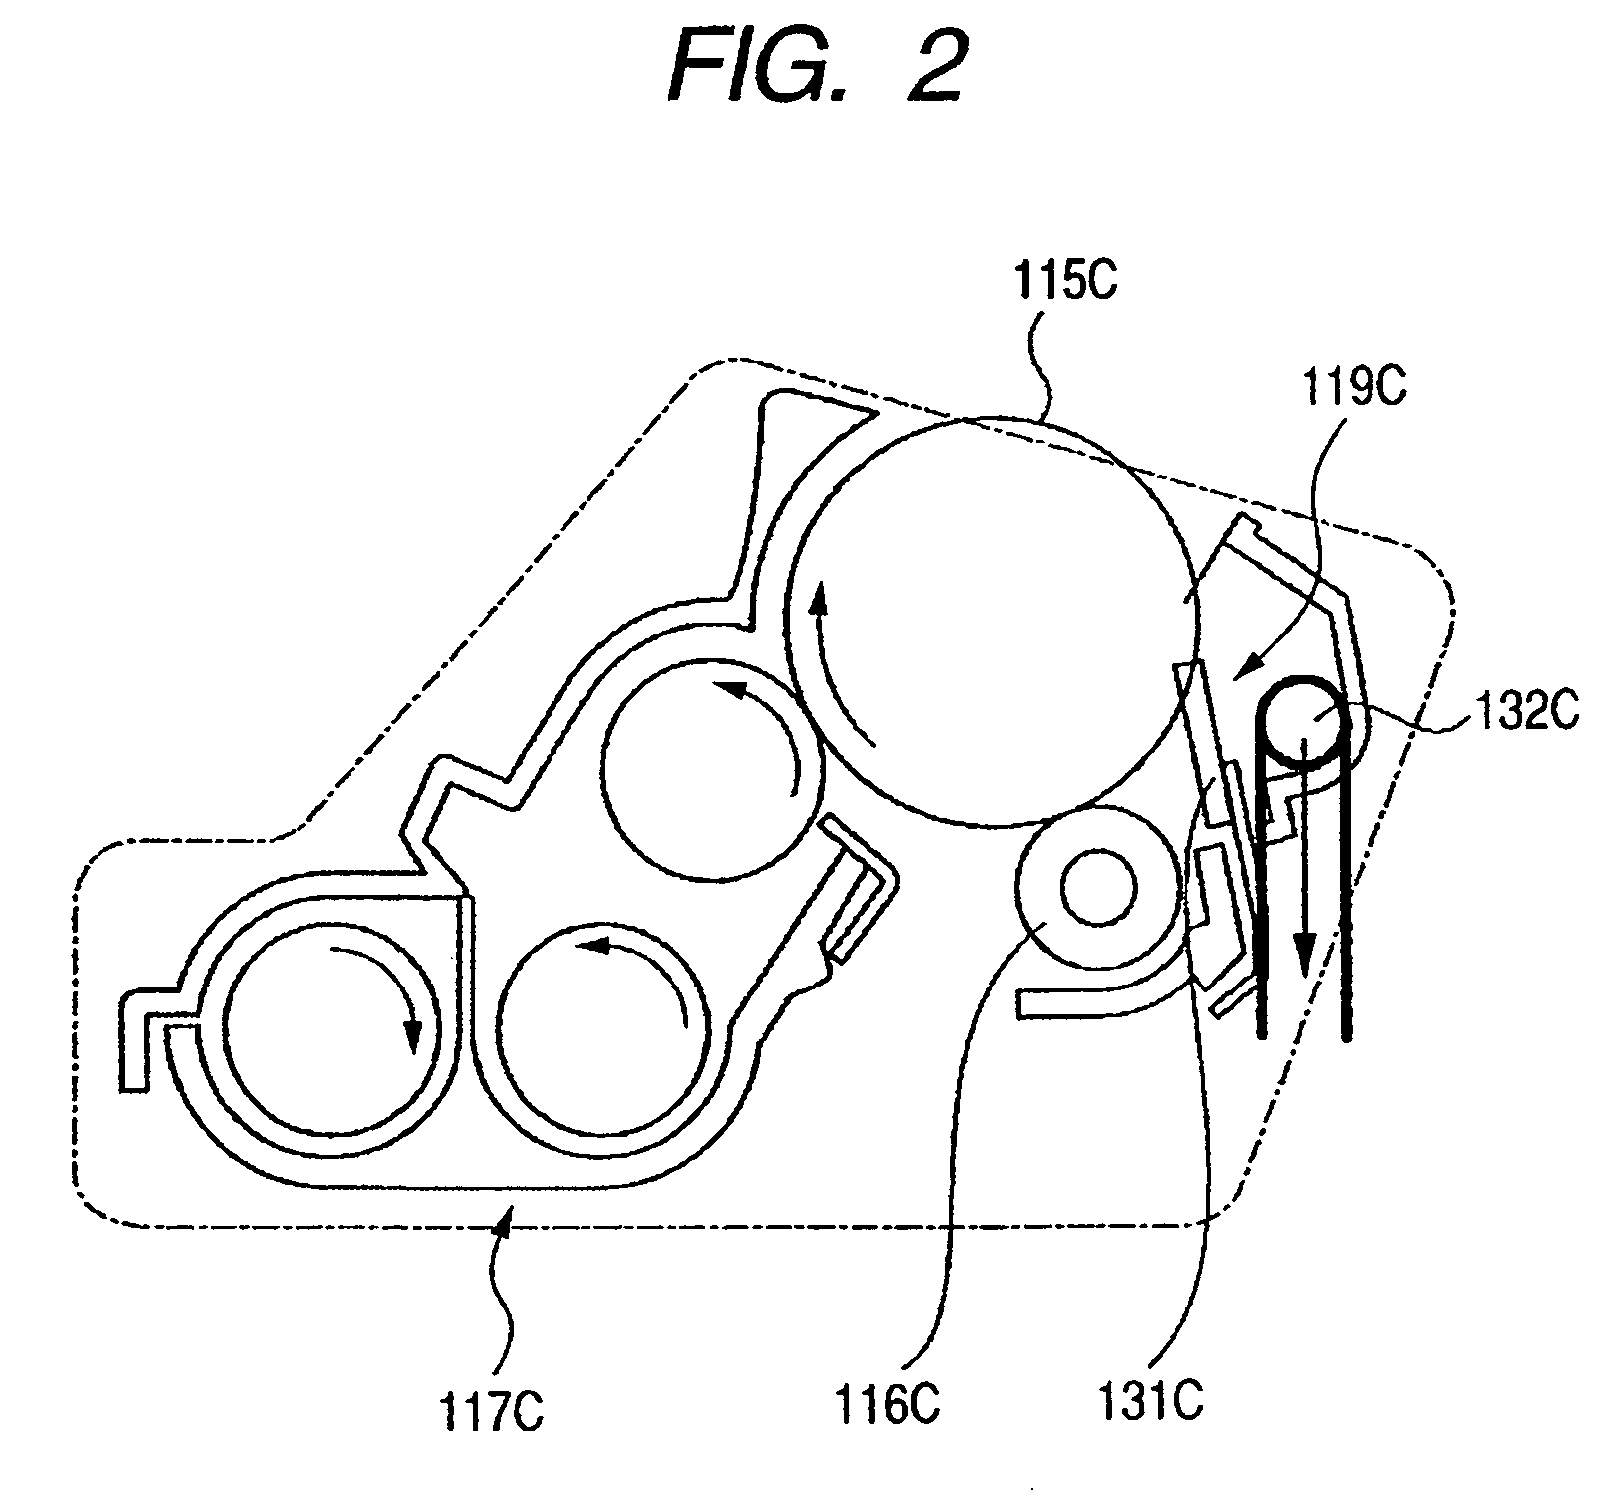 Cartridge detachably mounted to an image forming apparatus including a lock member engagable with a wall of the image forming apparatus